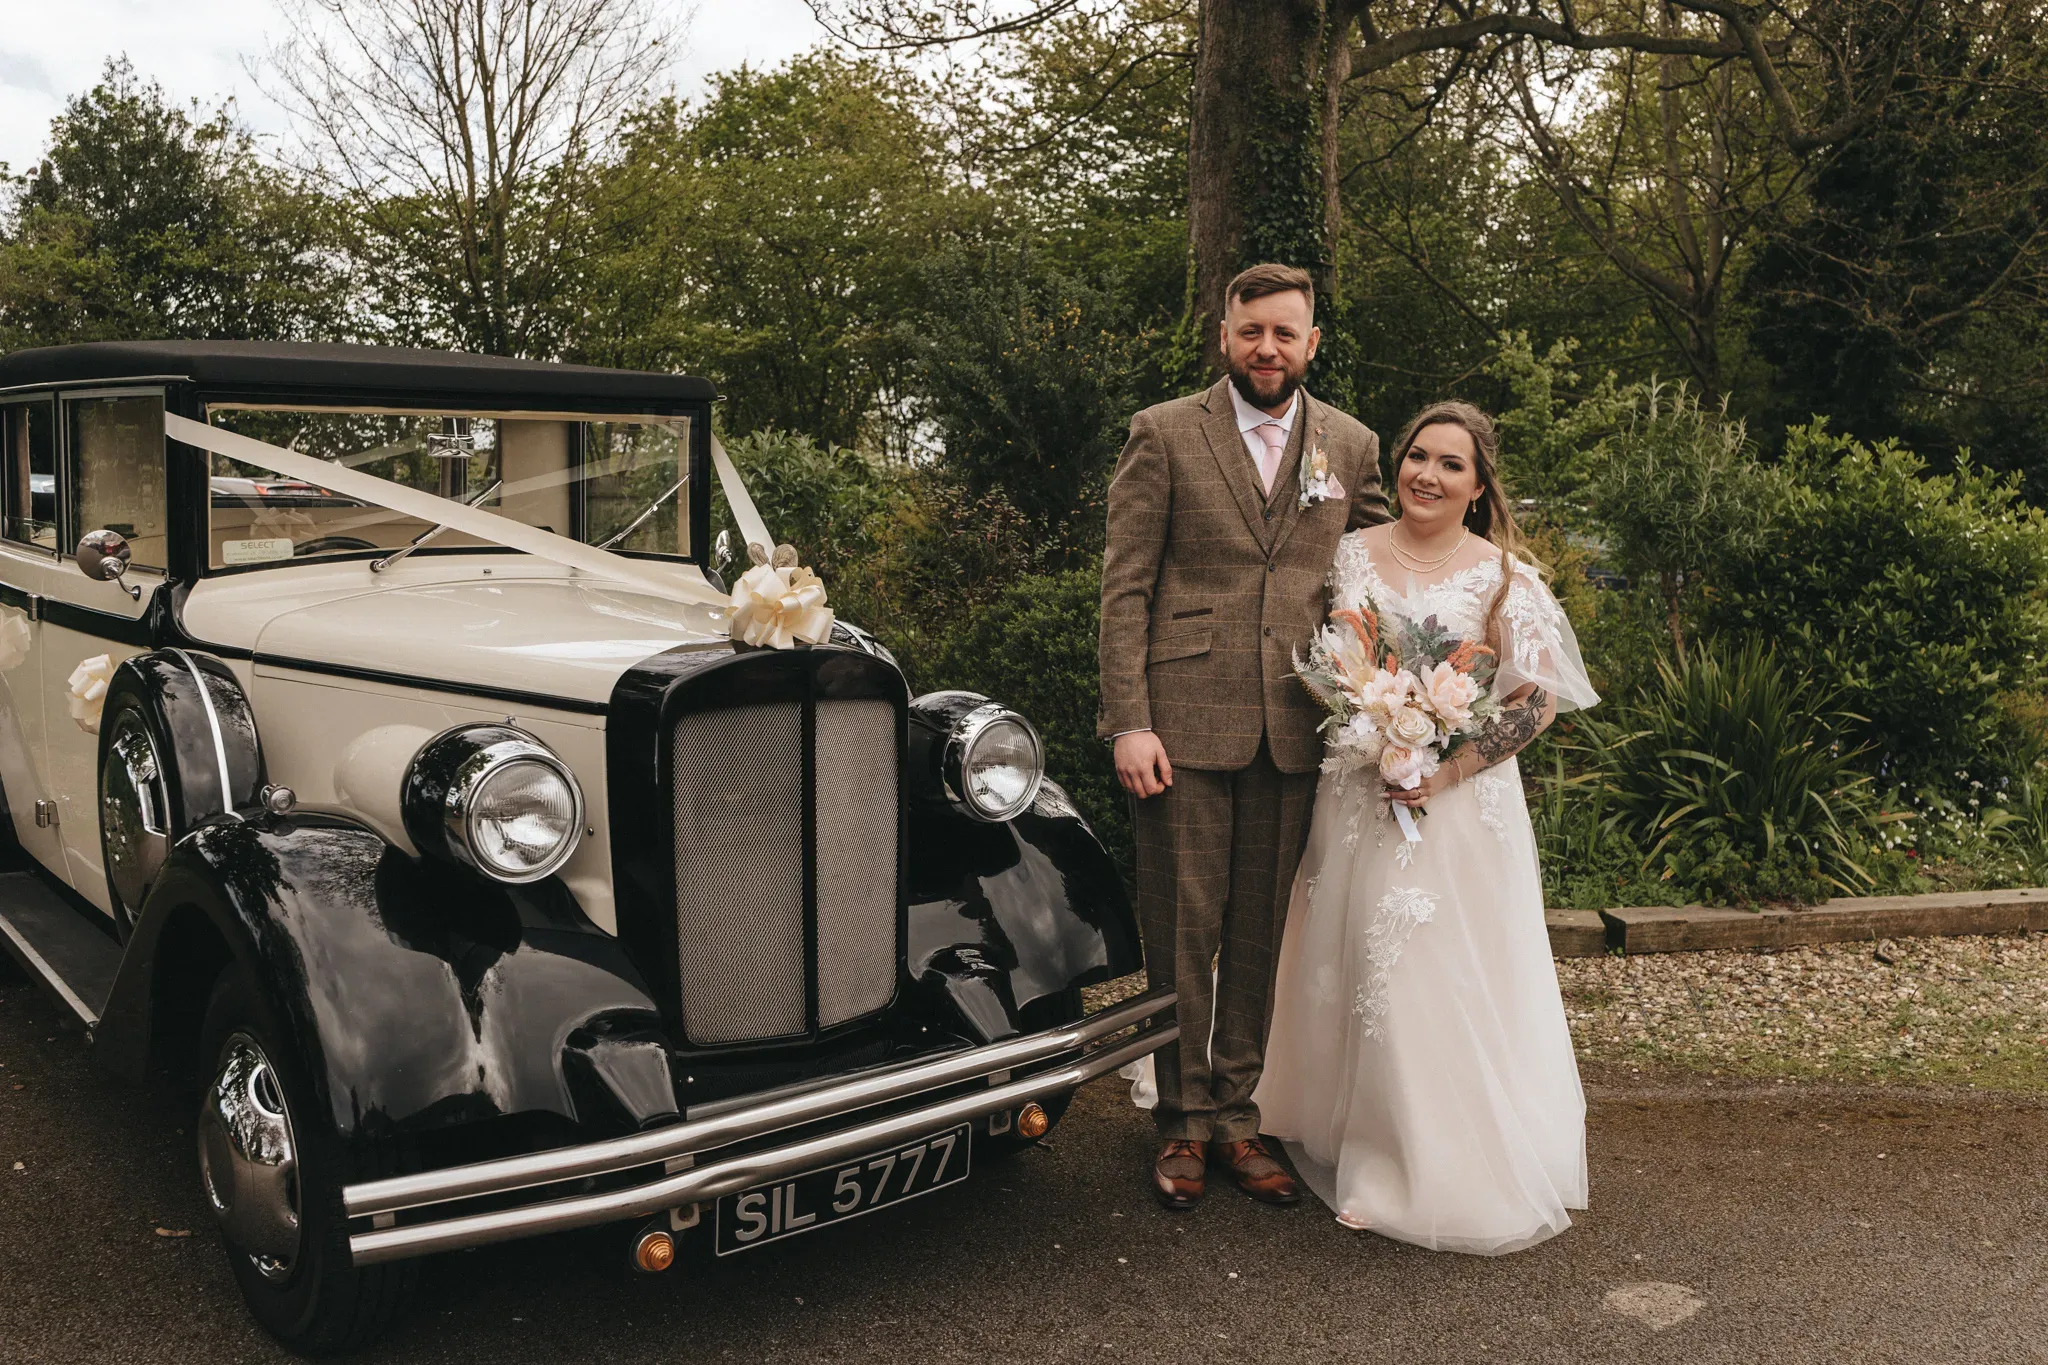 A bride and groom stand beside a vintage car in a park. the groom wears a tailored brown suit; the bride, a white gown with a bouquet. the car is black and white, adorned with a flower arrangement.